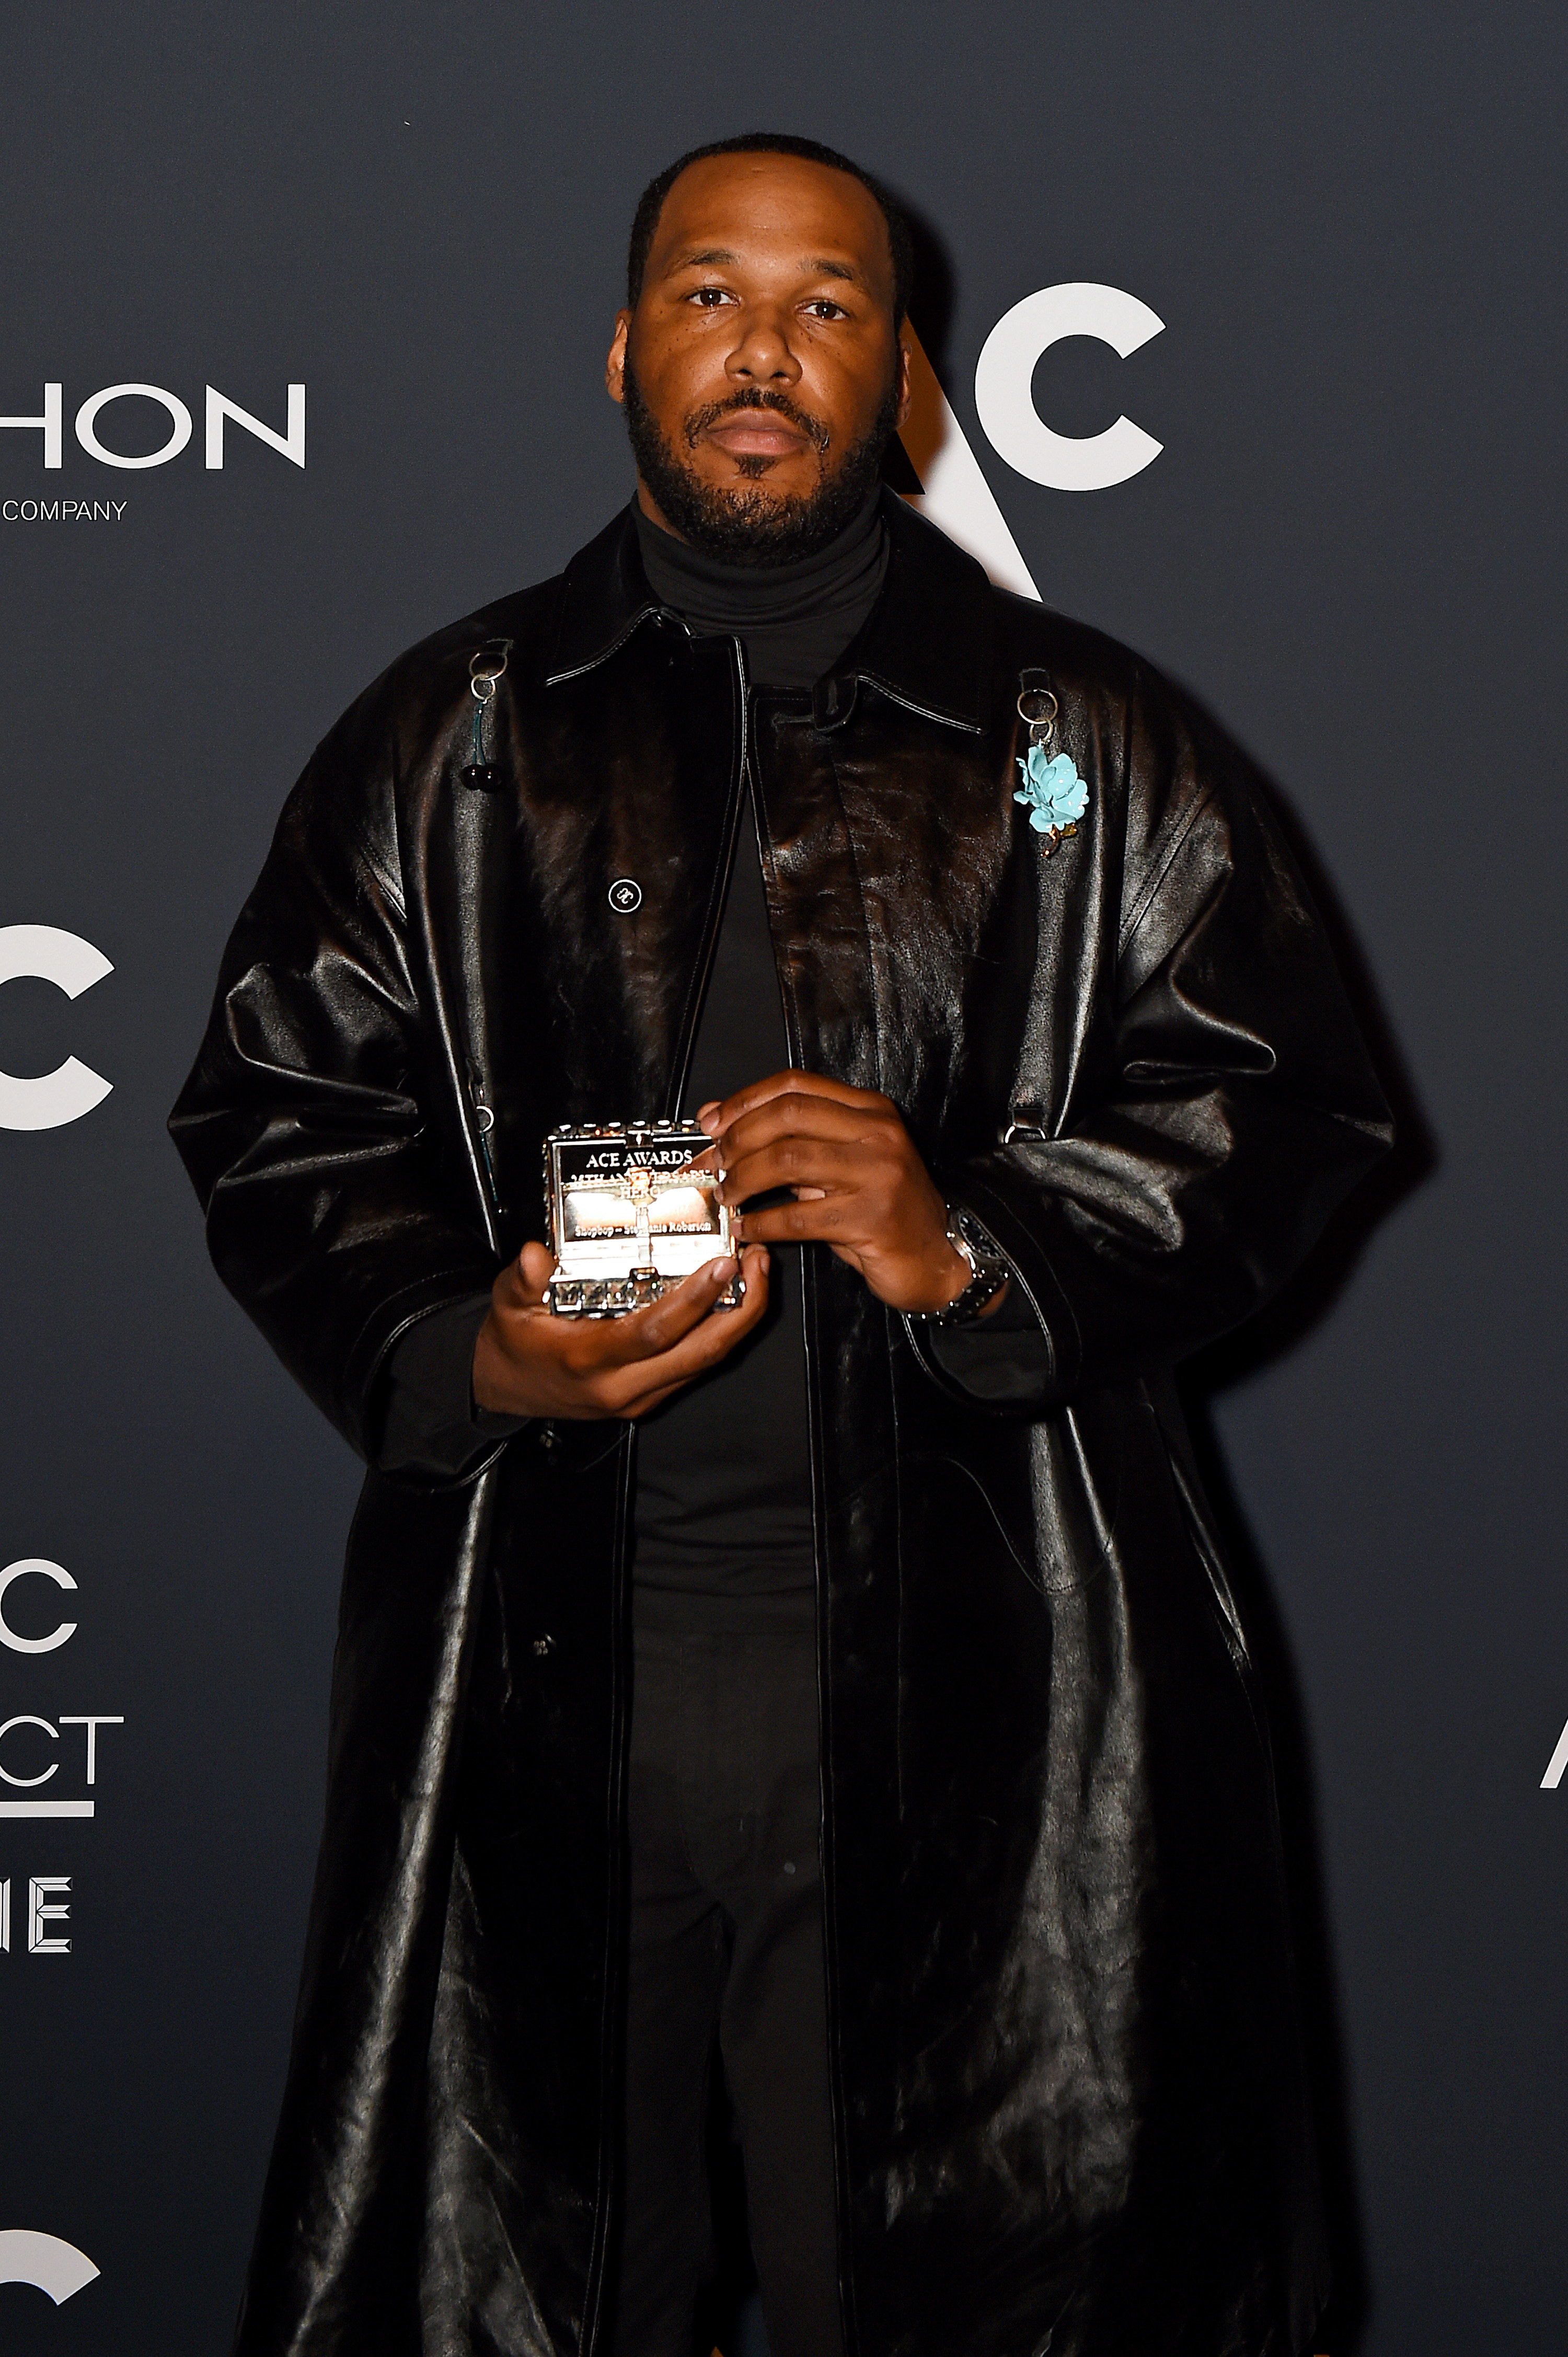 Jason Rembert poses with an award for Shopbop during the 25th Annual ACE Awards